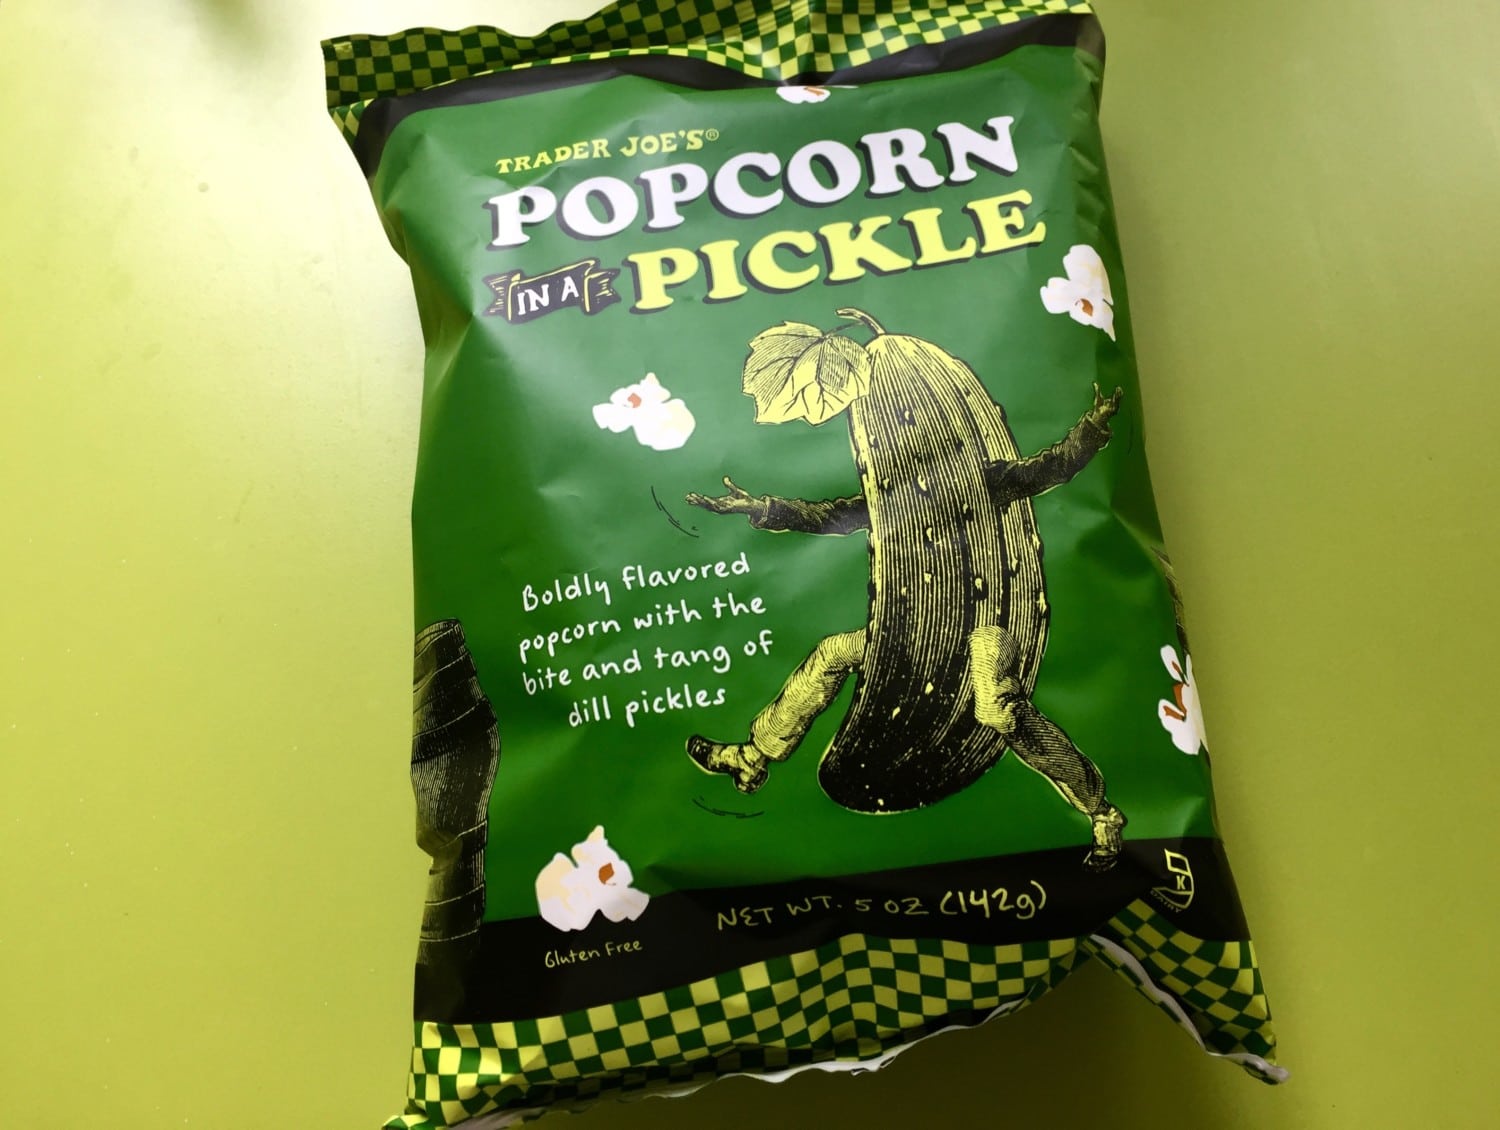 The pickle and ranch seasonings make really great popcorn! : r/traderjoes